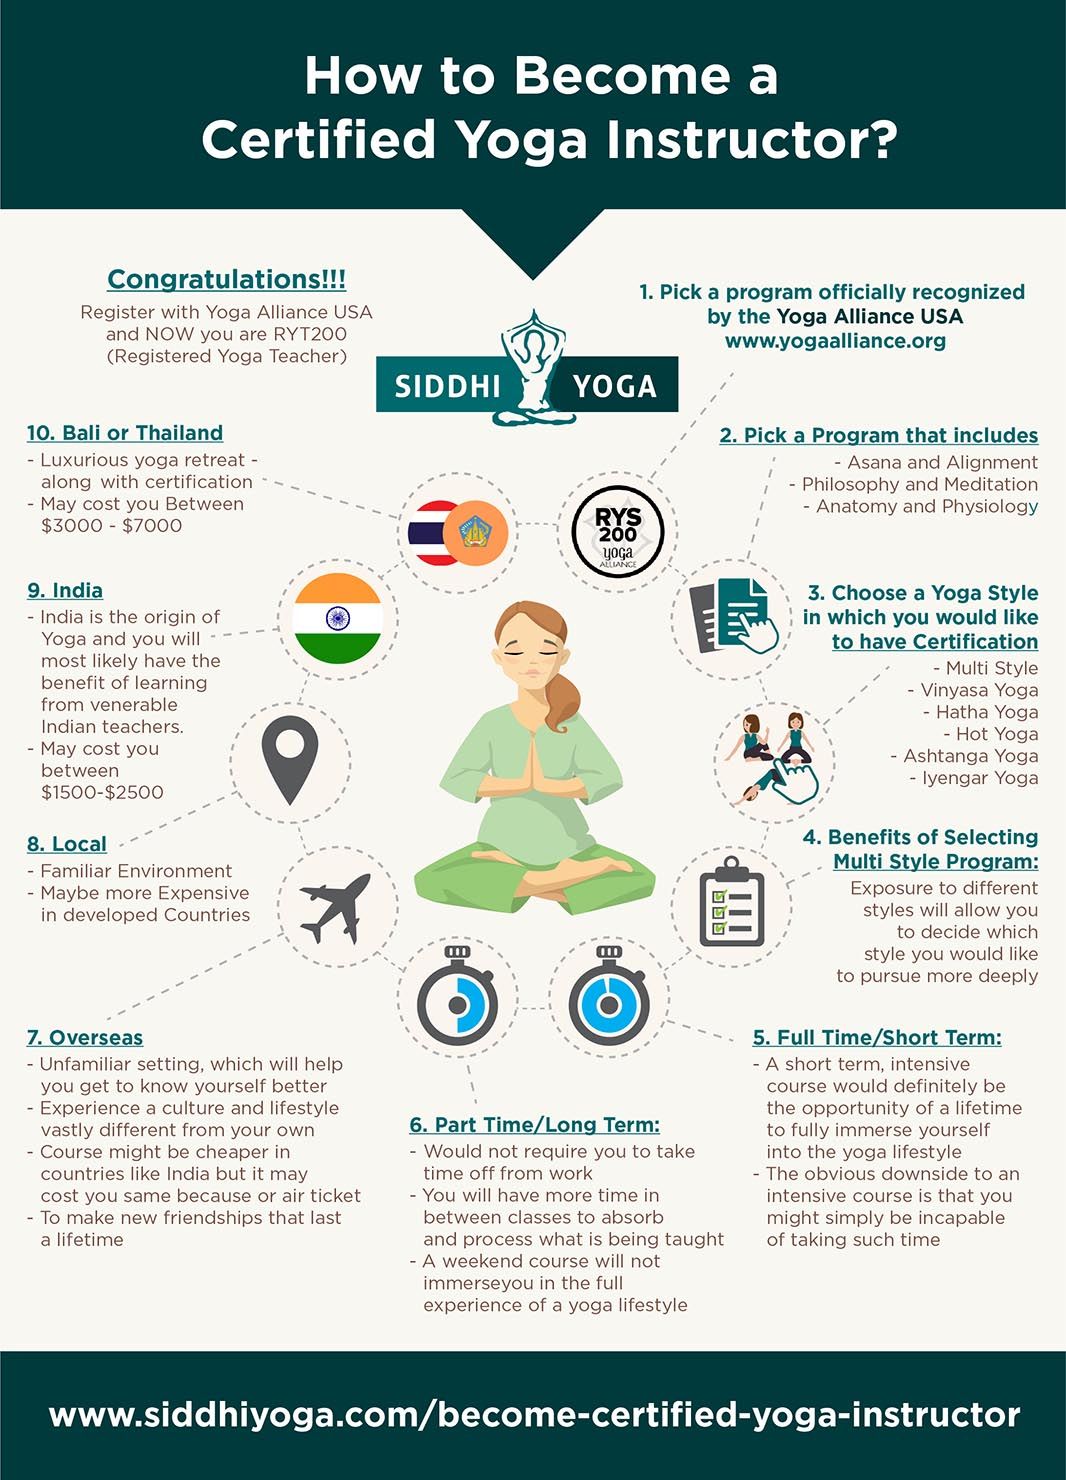 How to Become a Yoga Instructor - Complete Guide - Certified Yoga